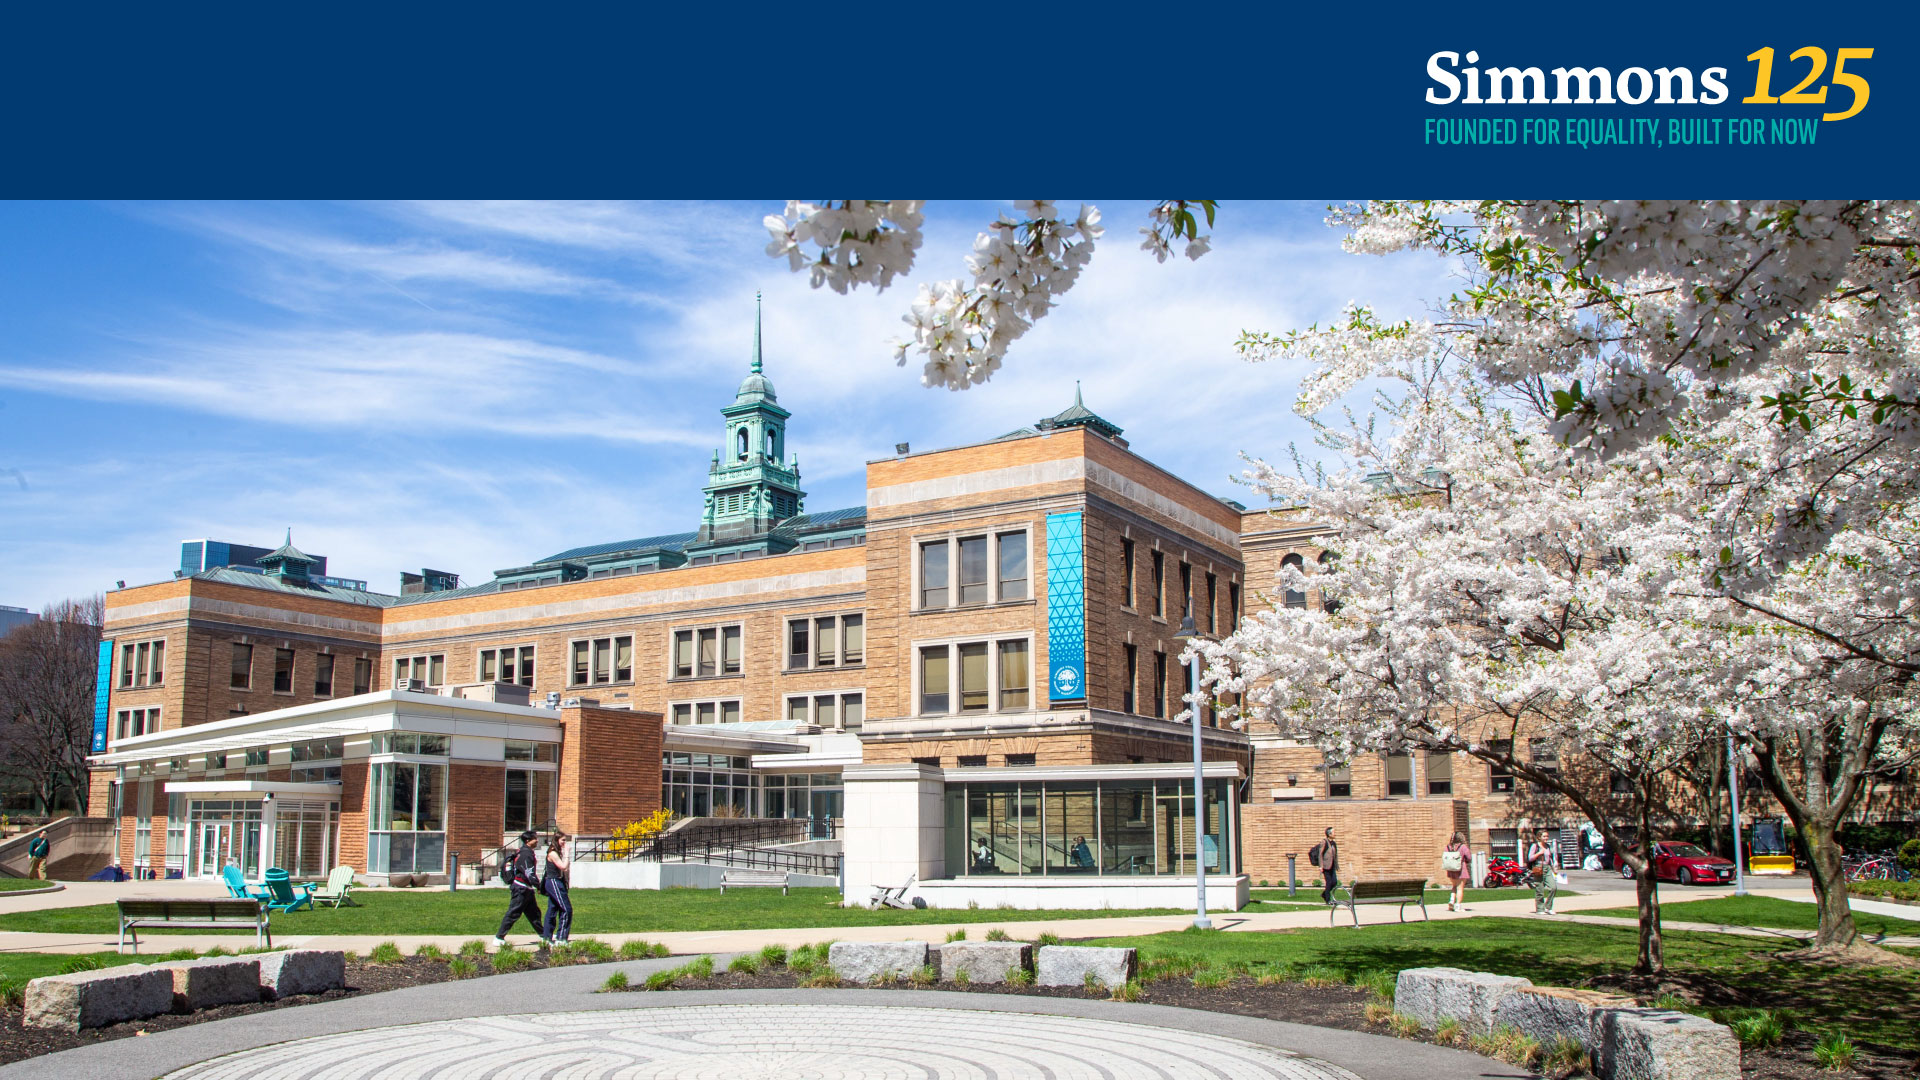 A Zoom background for the Simmons 125th Anniversary featuring a photo of the Simmons University campus with trees in bloom